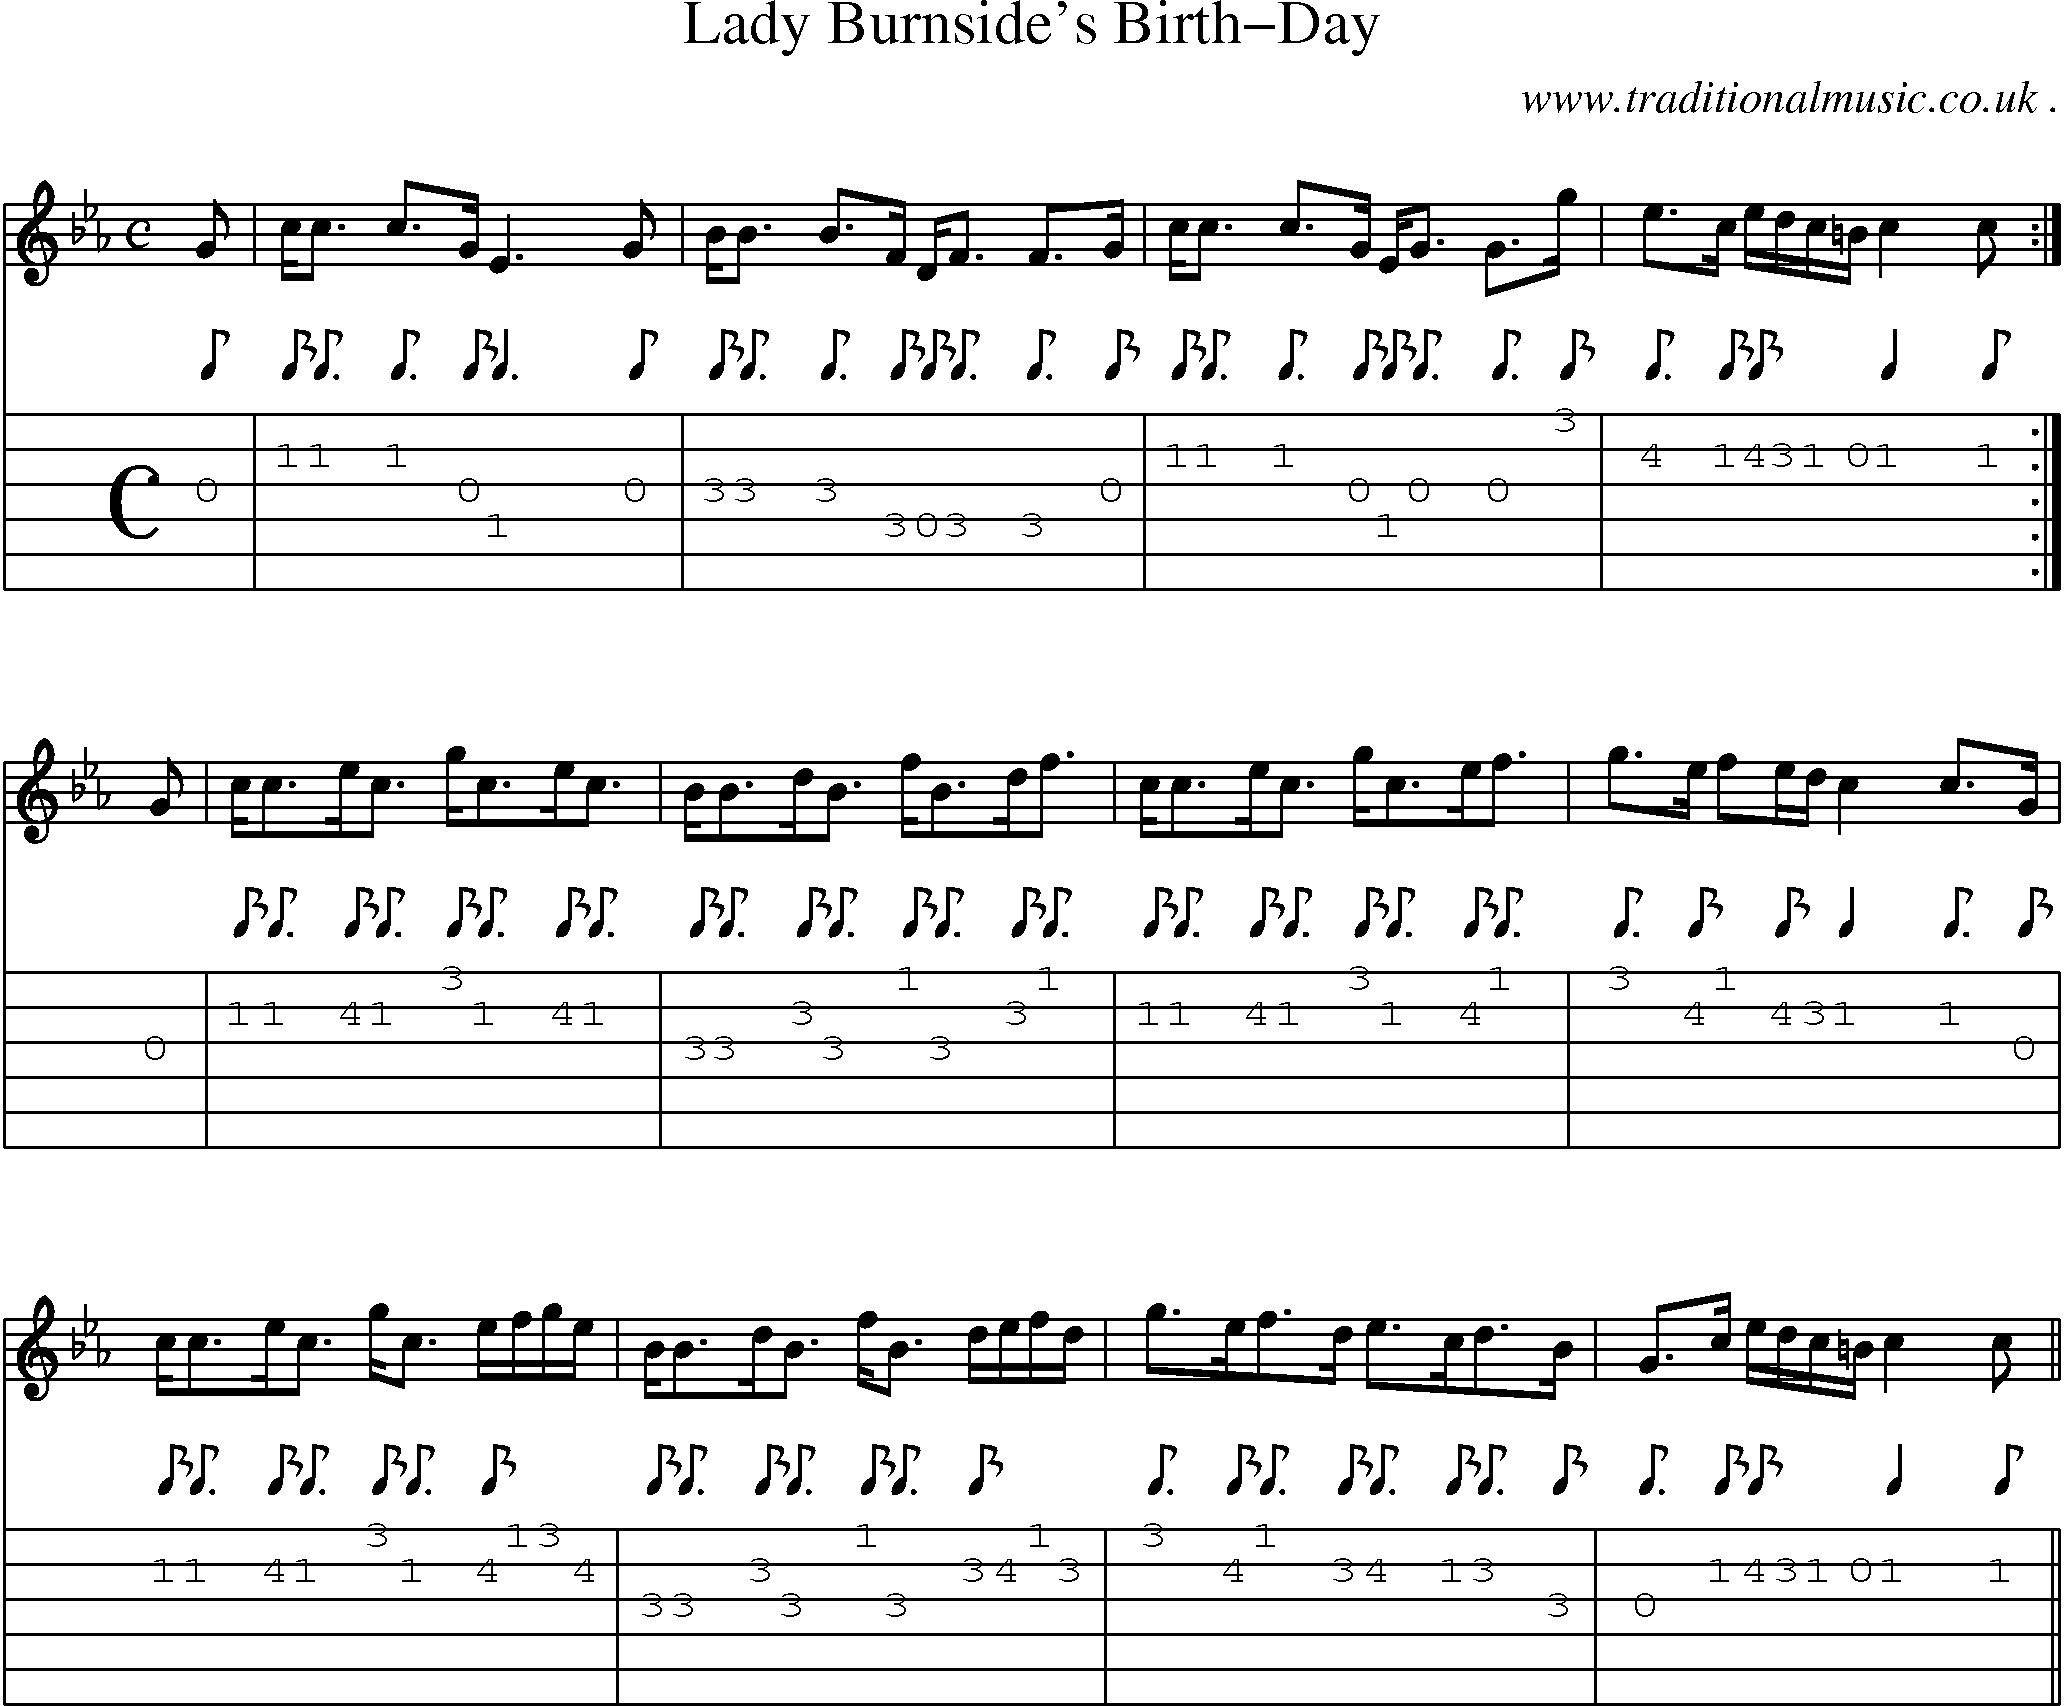 Sheet-music  score, Chords and Guitar Tabs for Lady Burnsides Birth-day